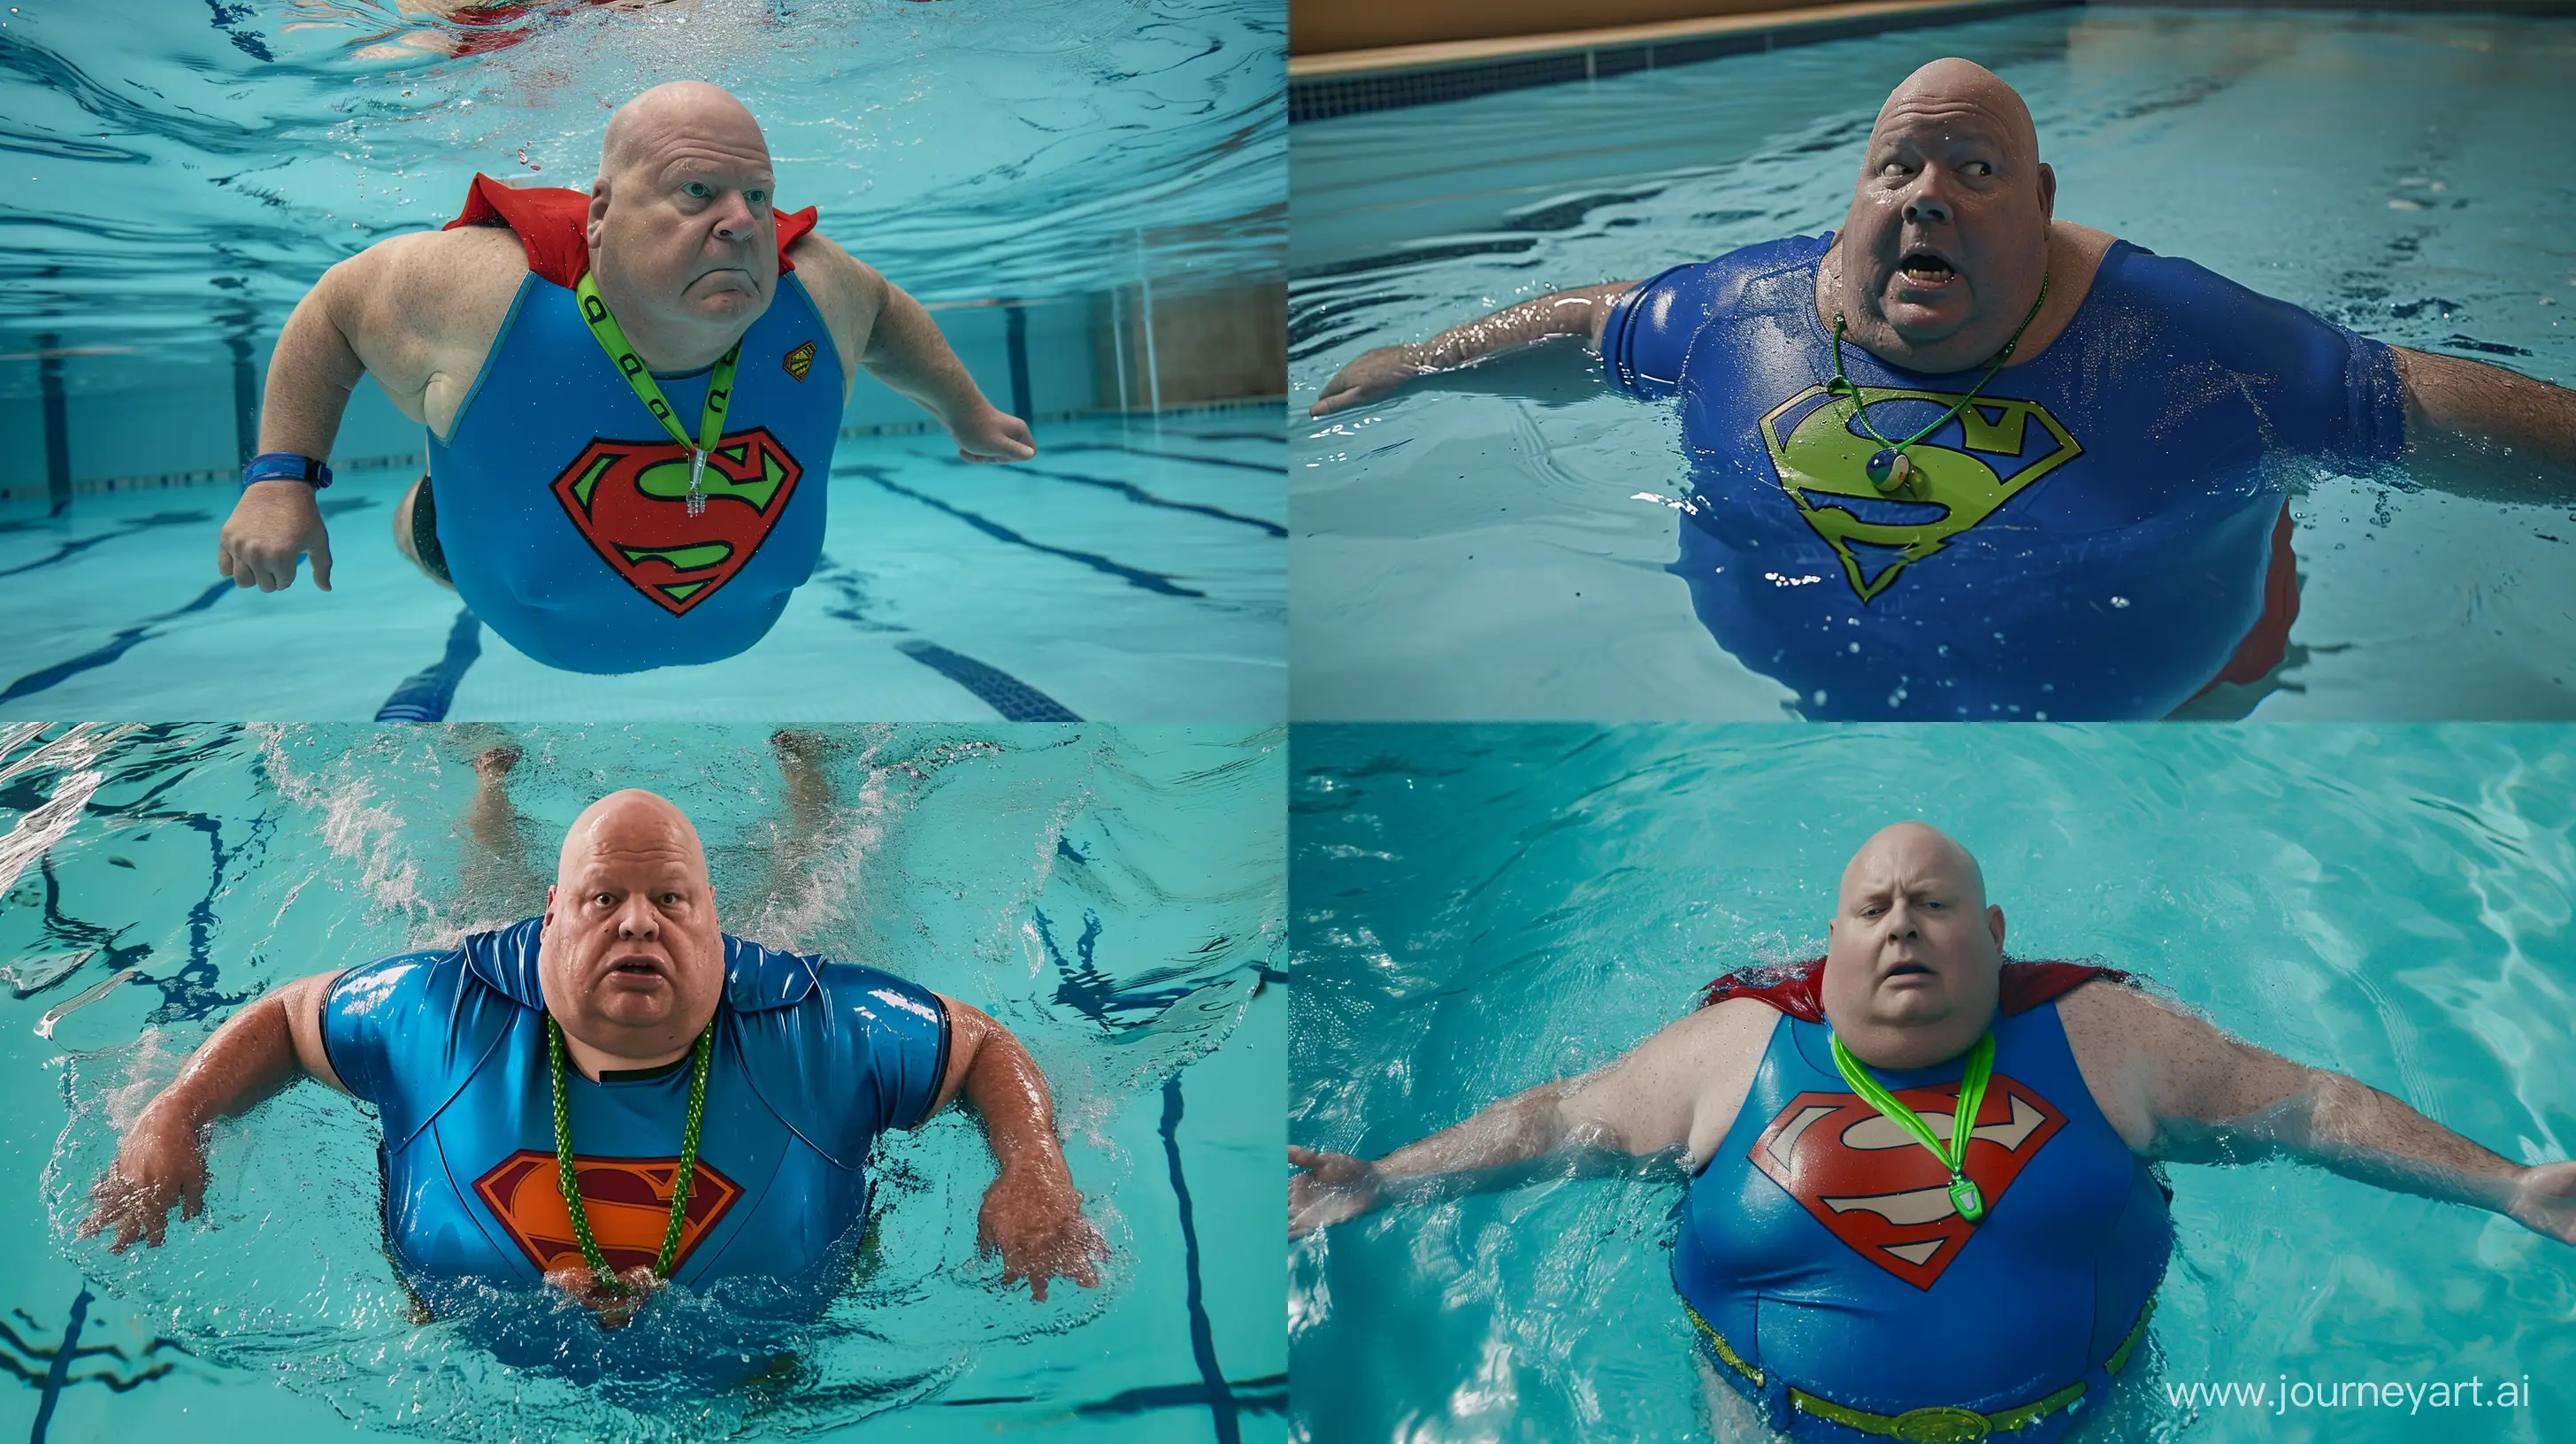 Fearful-70YearOld-Superman-Swimming-in-Bright-Blue-Costume